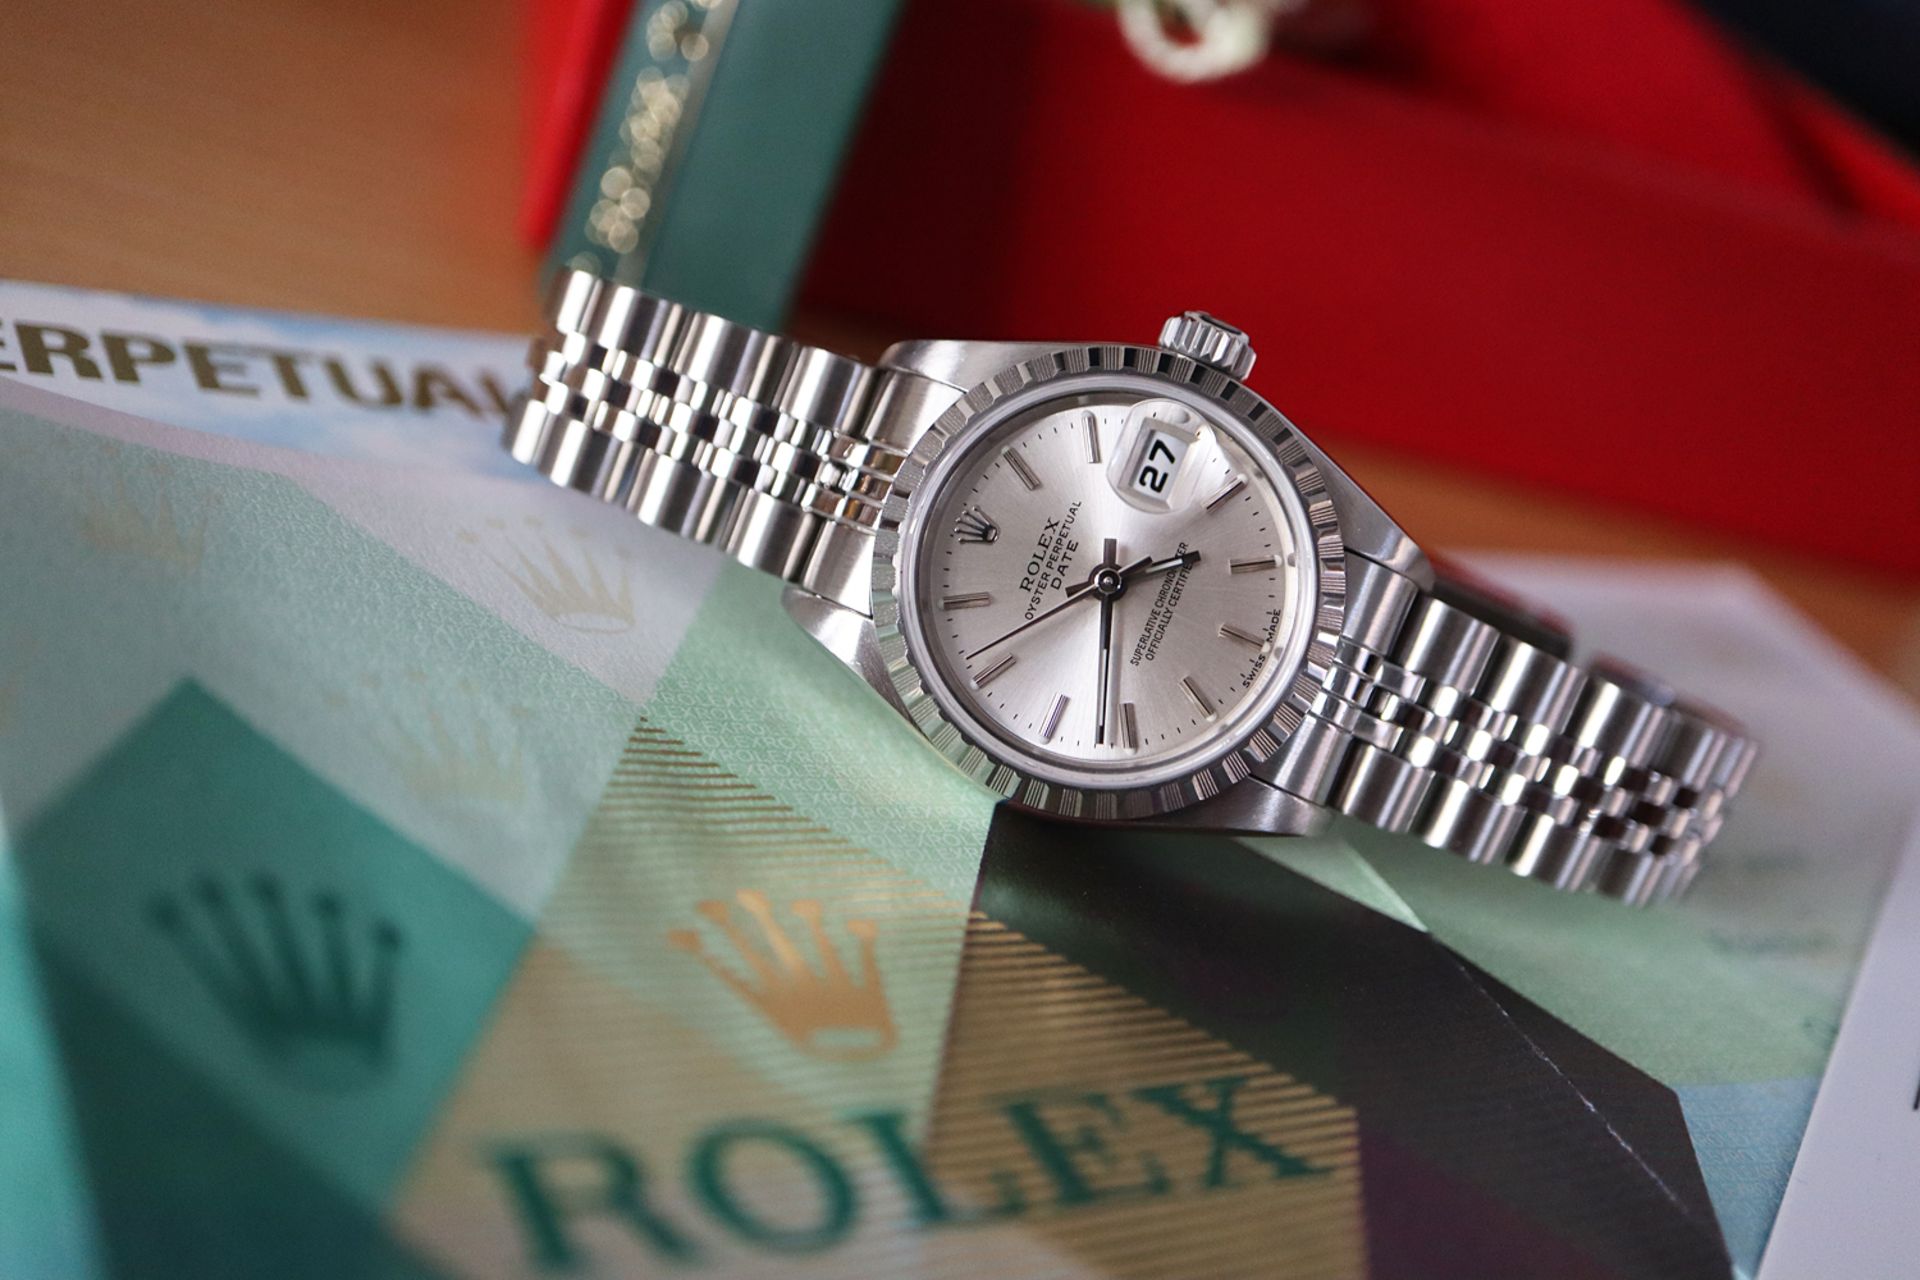 ROLEX OYSTER DATE / DATEJUST MODEL 79240 - FULL SET BOX AND CERTIFICATES ETC - Image 11 of 12